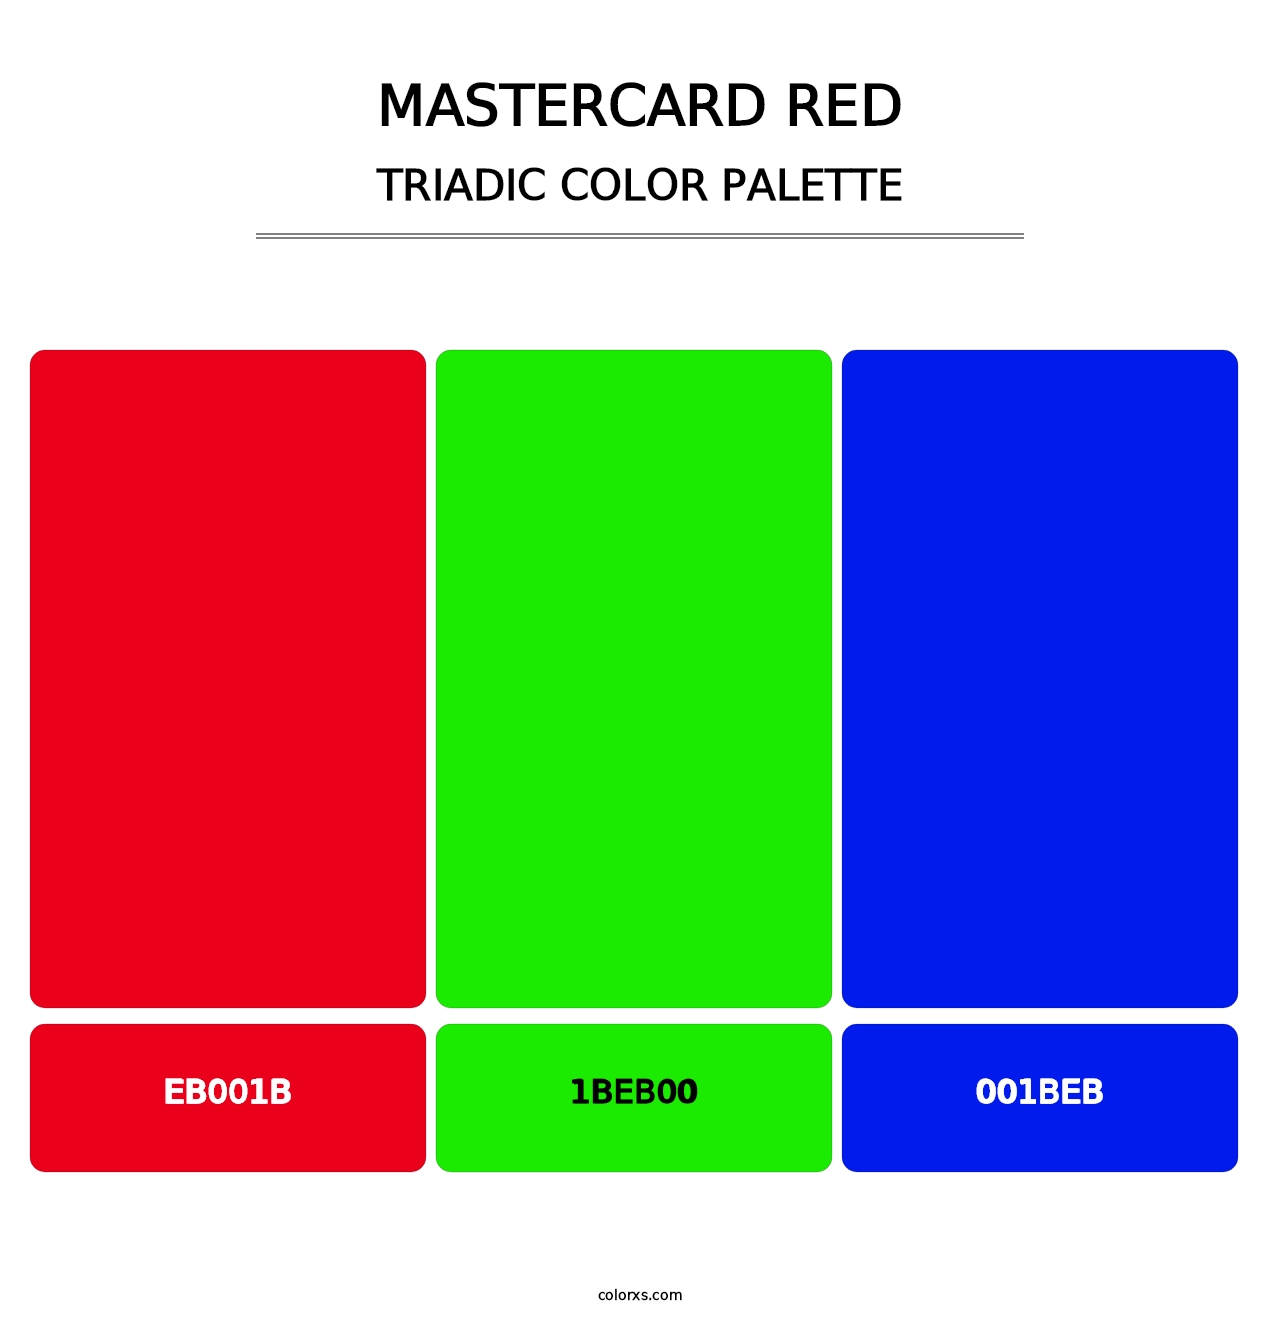 Mastercard Red - Triadic Color Palette